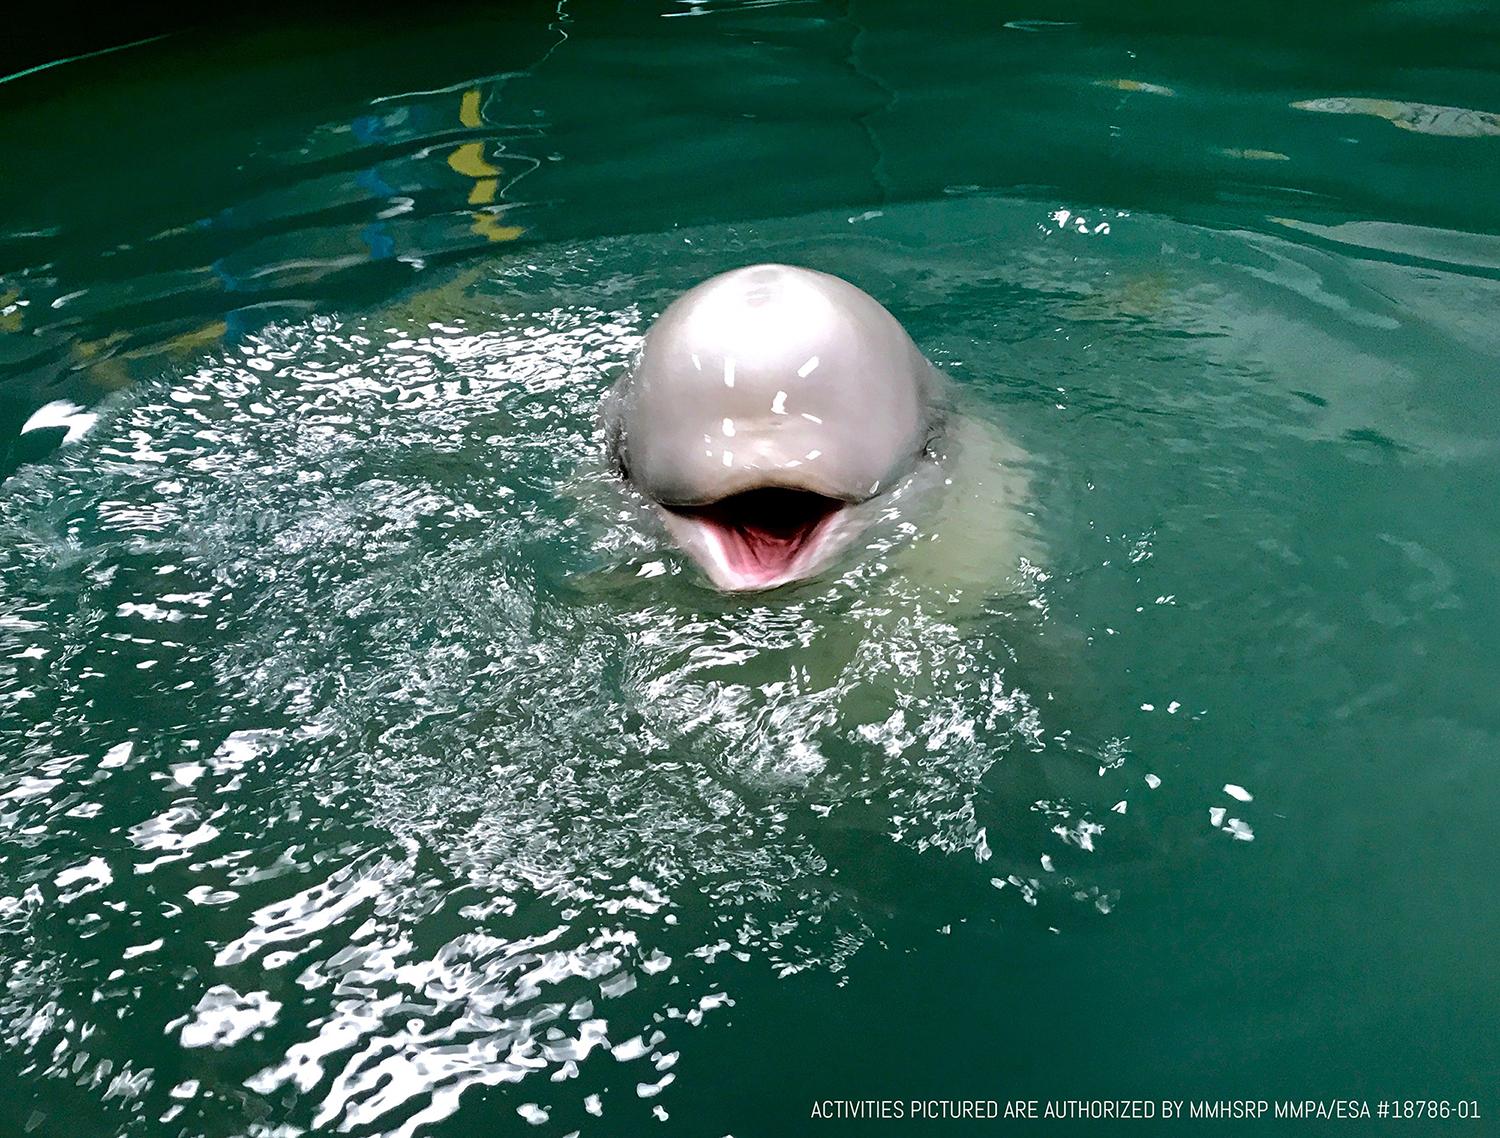 First 'retirement home' for showbiz beluga whales